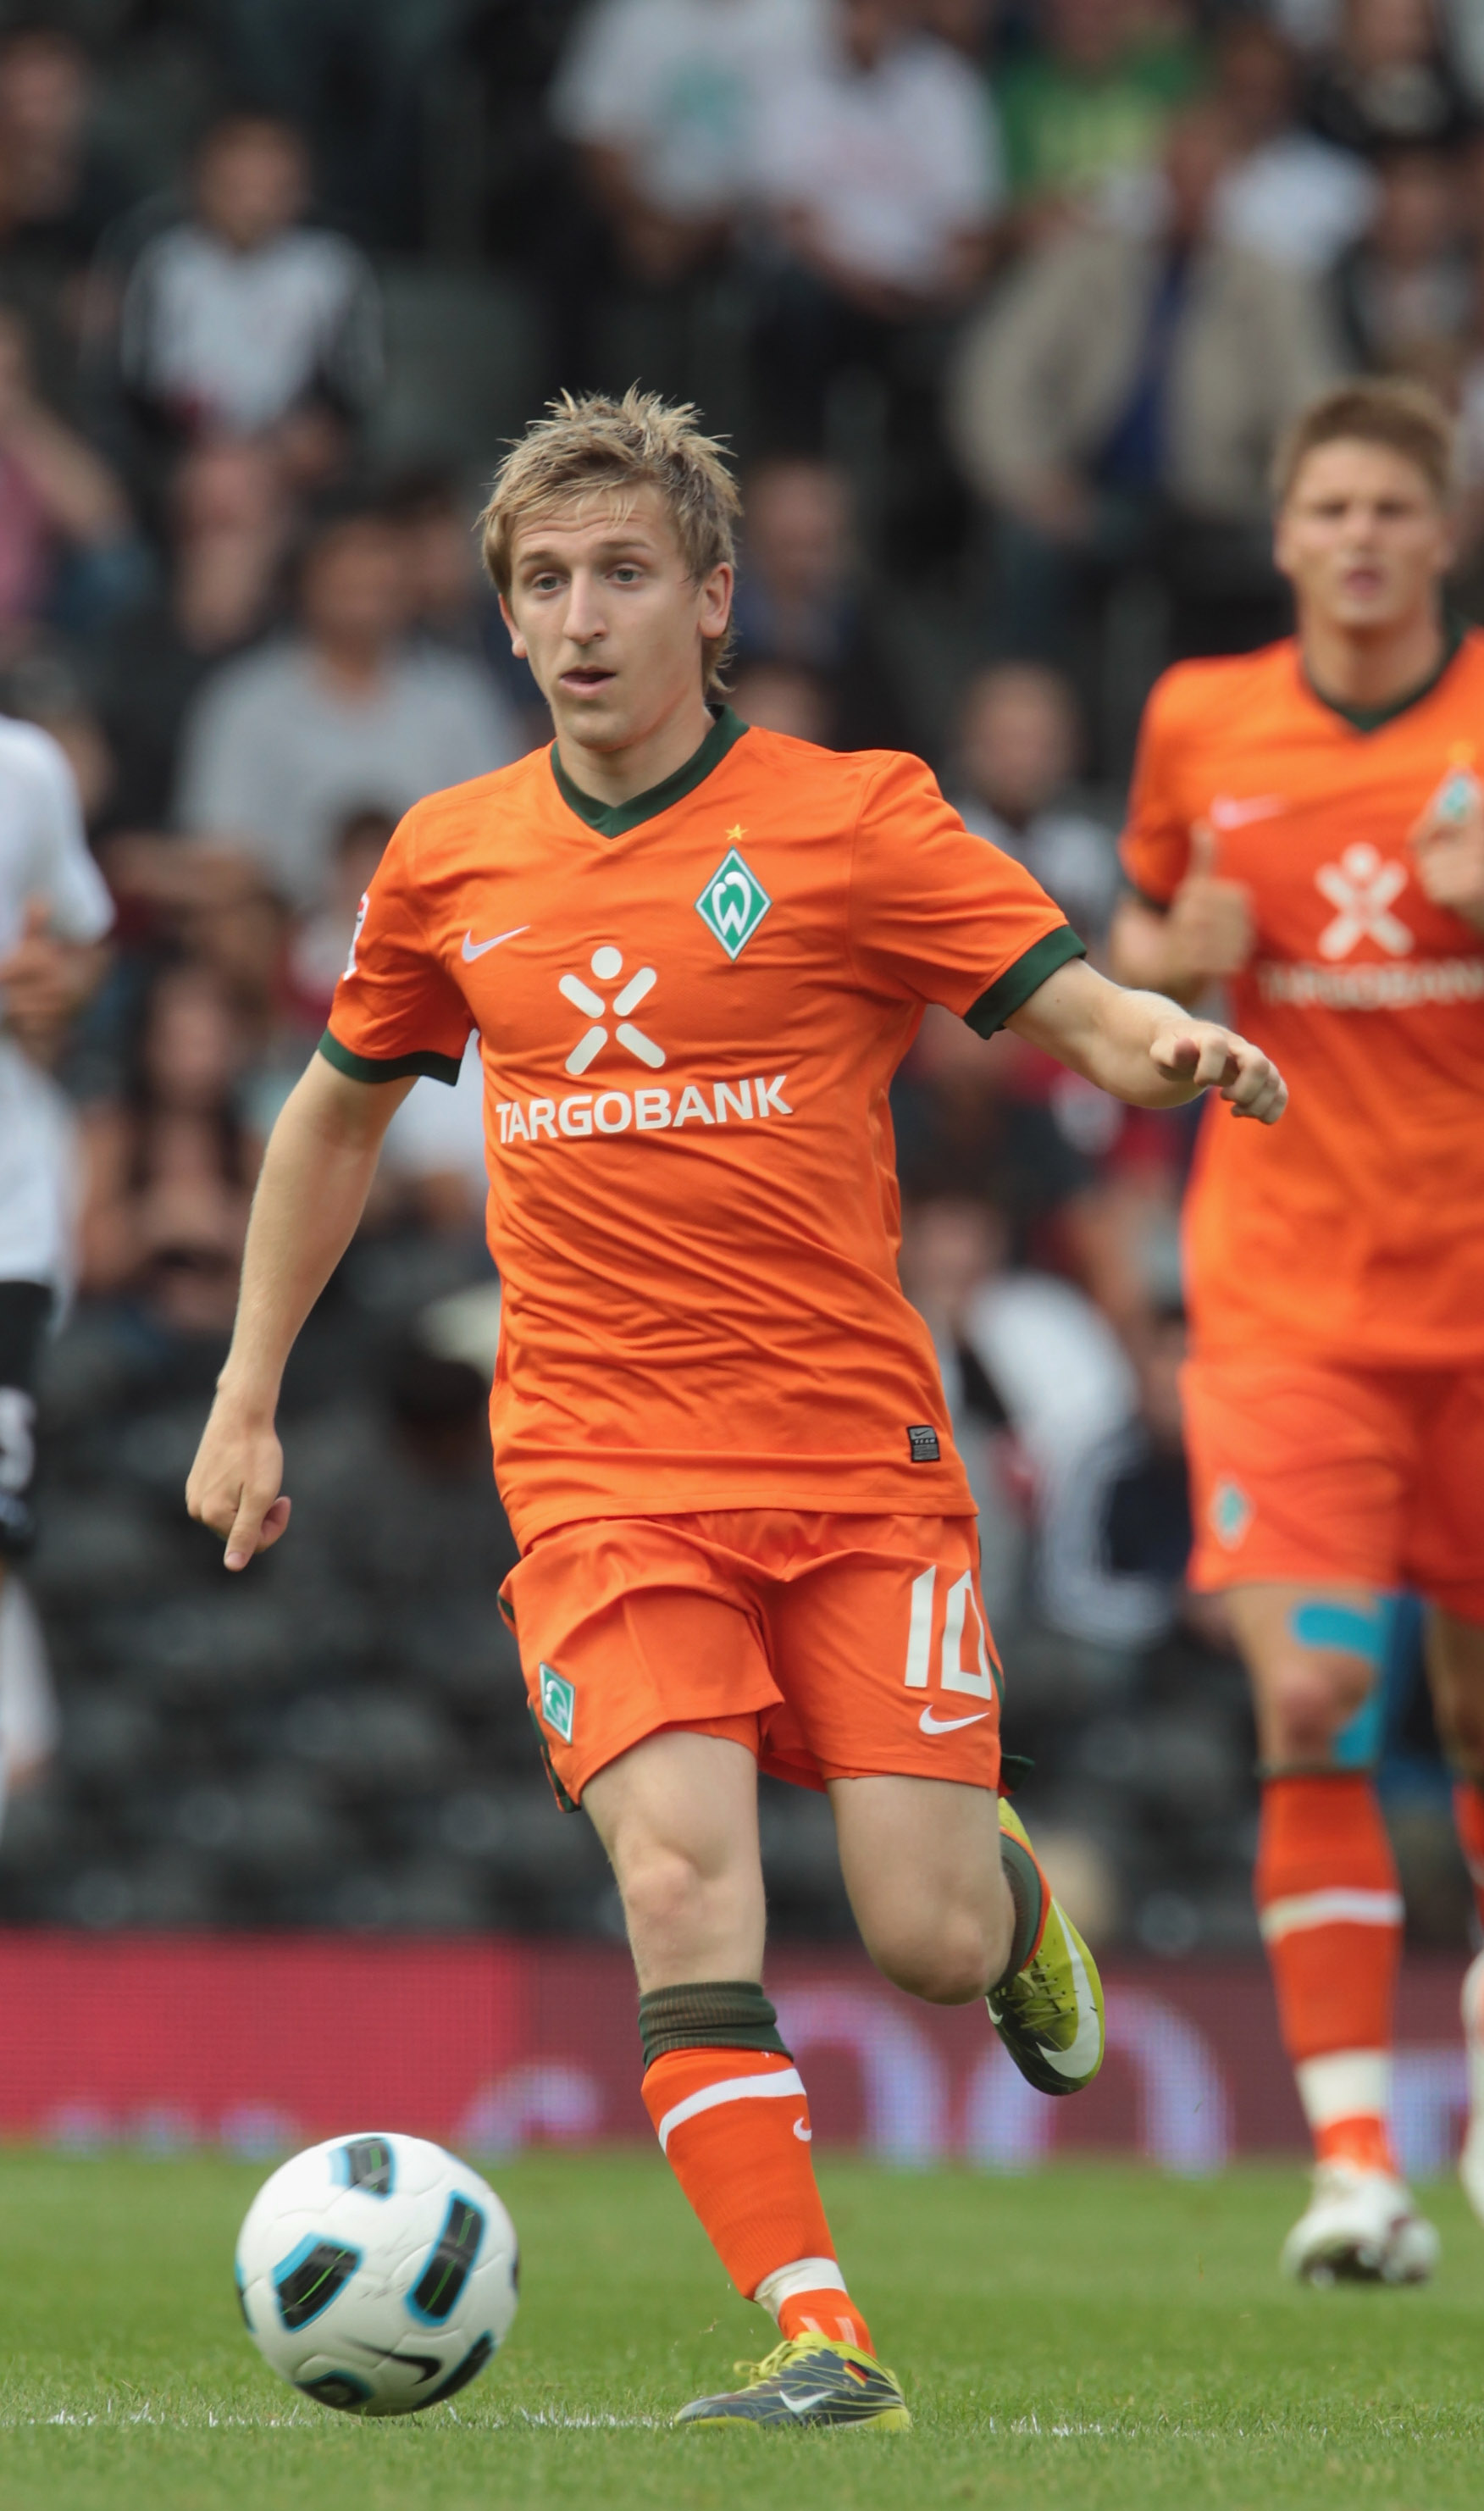 LONDON, ENGLAND - AUGUST 07: Marko Marin of Werder Bremen during a Friendly match between Fulham and Werder Bremen at Craven Cottage on August 7, 2010 in London, England.  (Photo by Phil Cole/Getty Images)